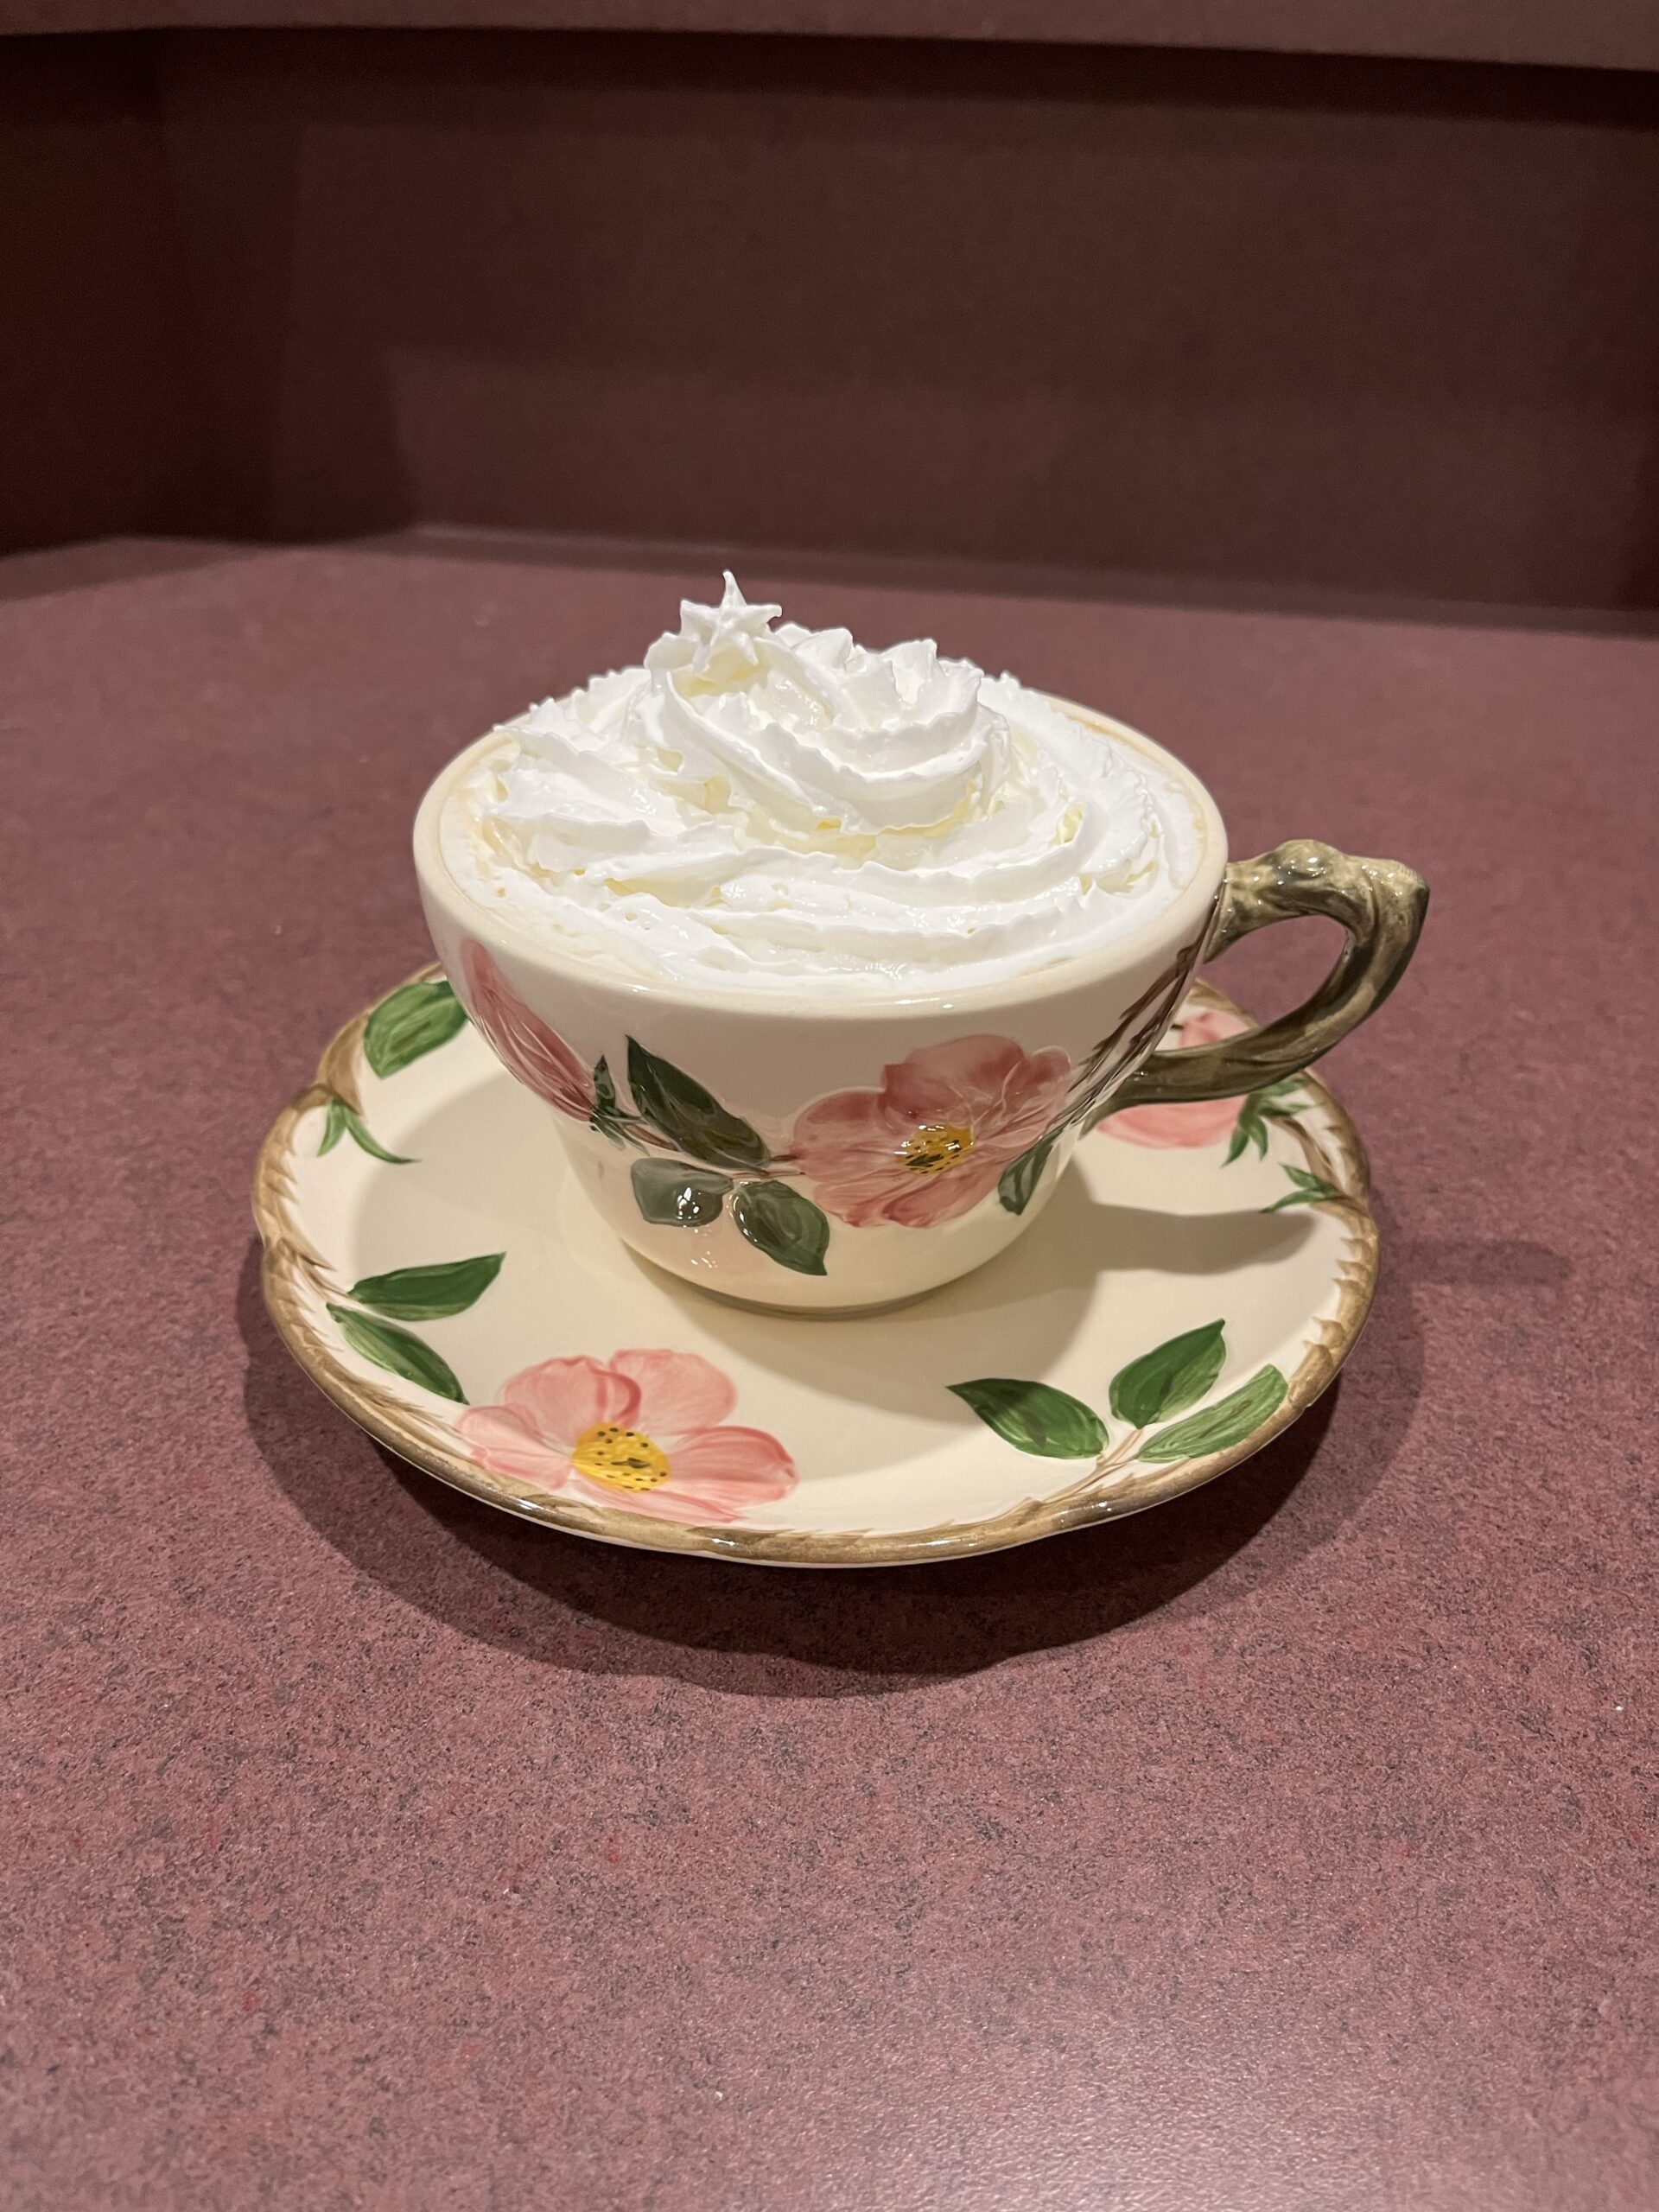 coffee with cream and sugar in cup and saucer topped with spray whipped cream